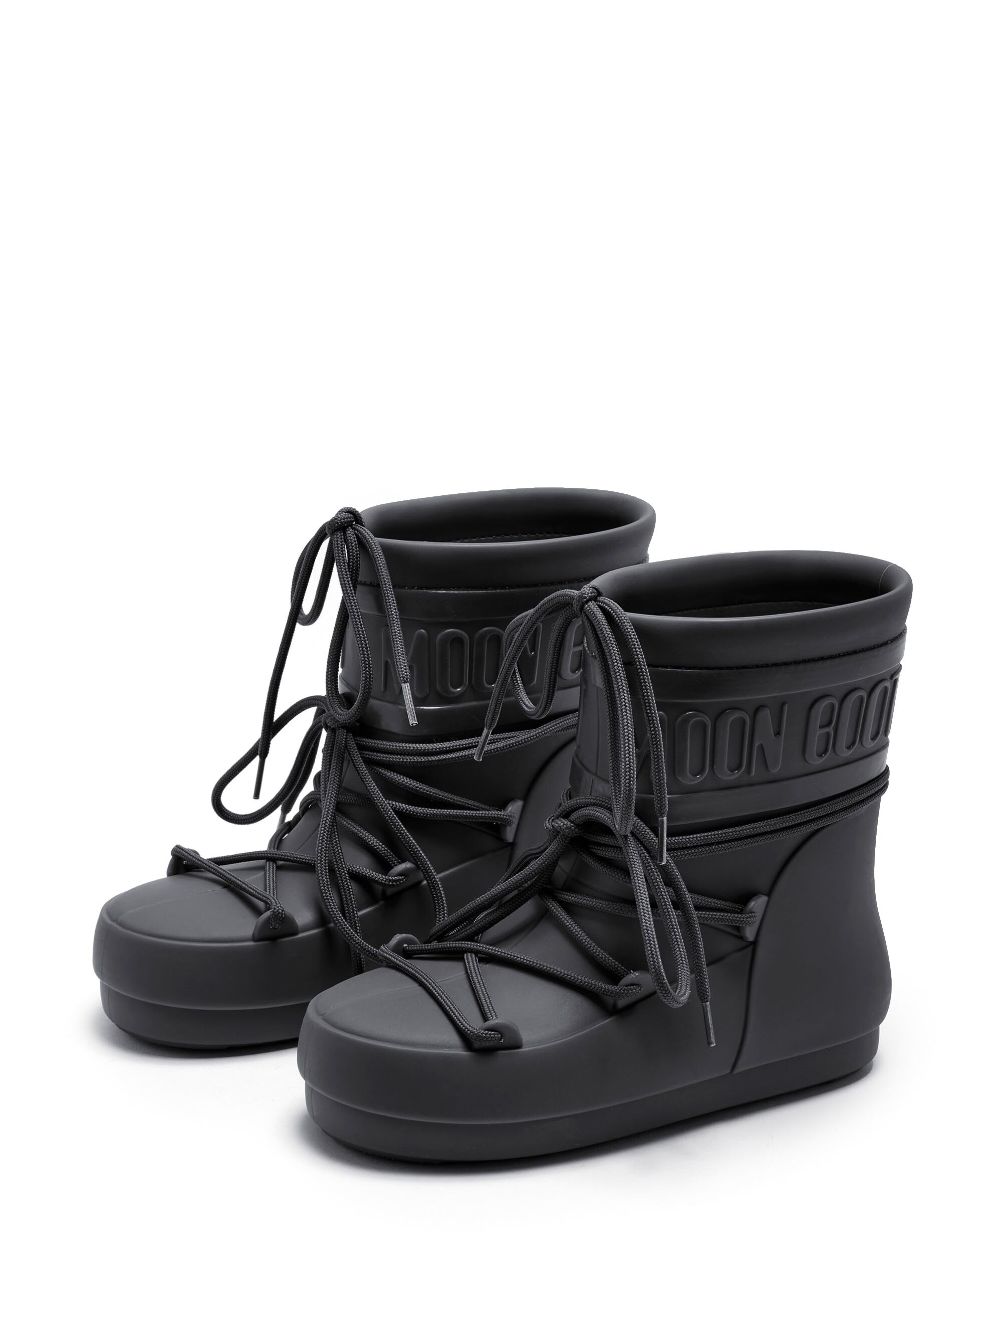 Moon Boot ProTECHt Low Snow Boots - Farfetch